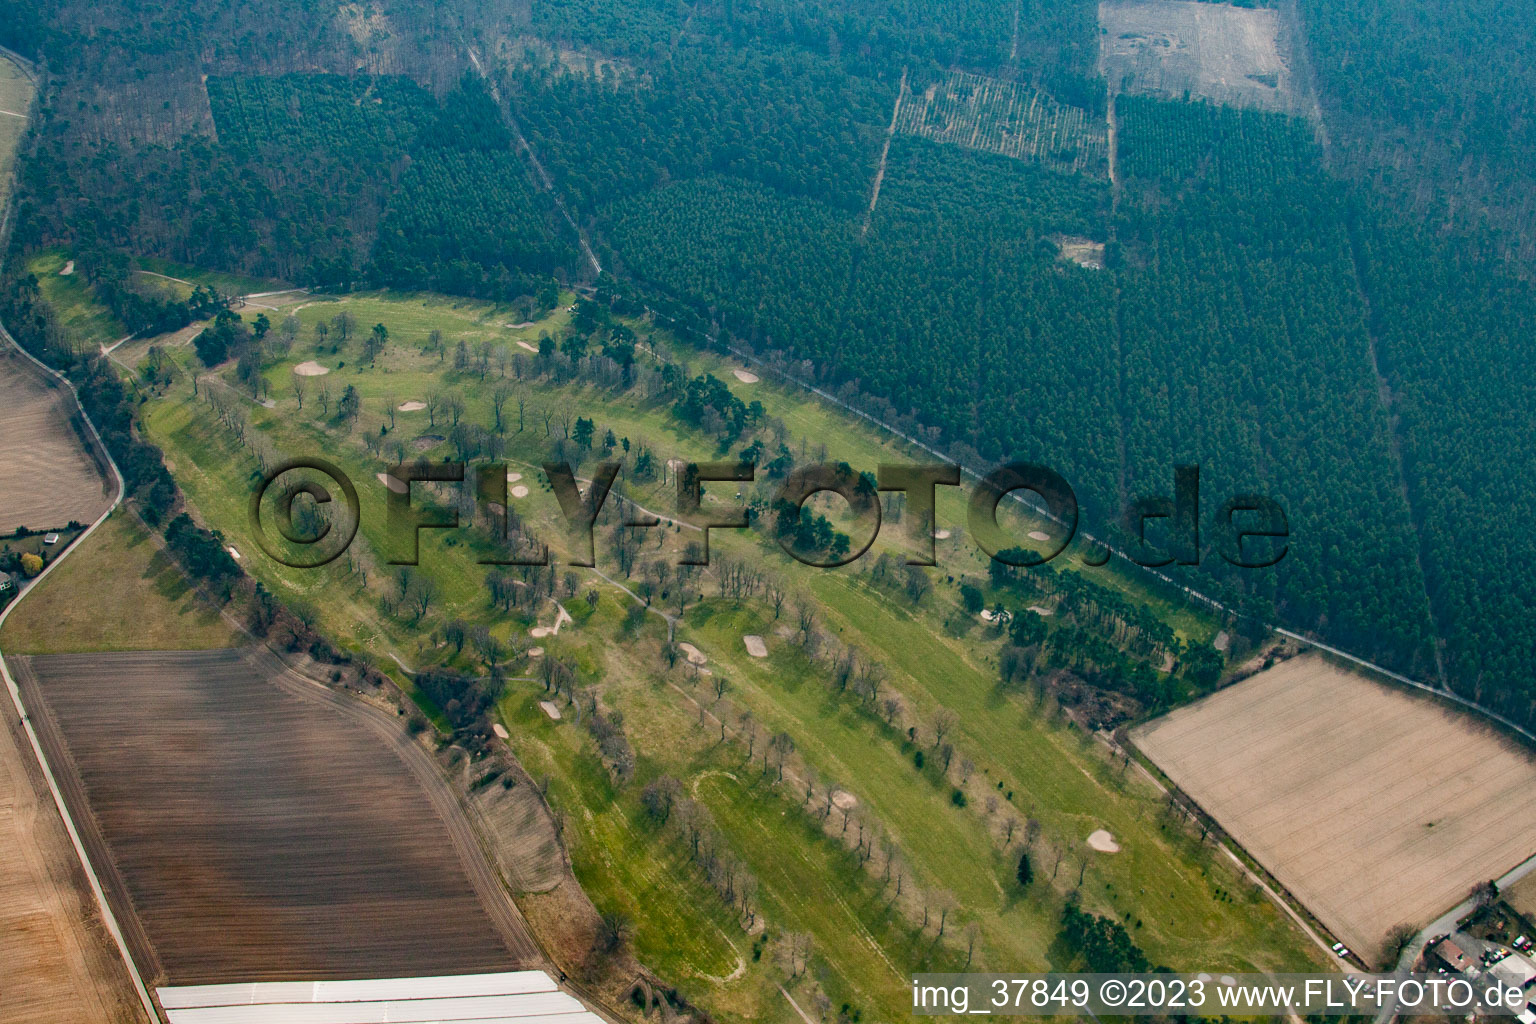 Aerial view of Golf club in Oftersheim in the state Baden-Wuerttemberg, Germany